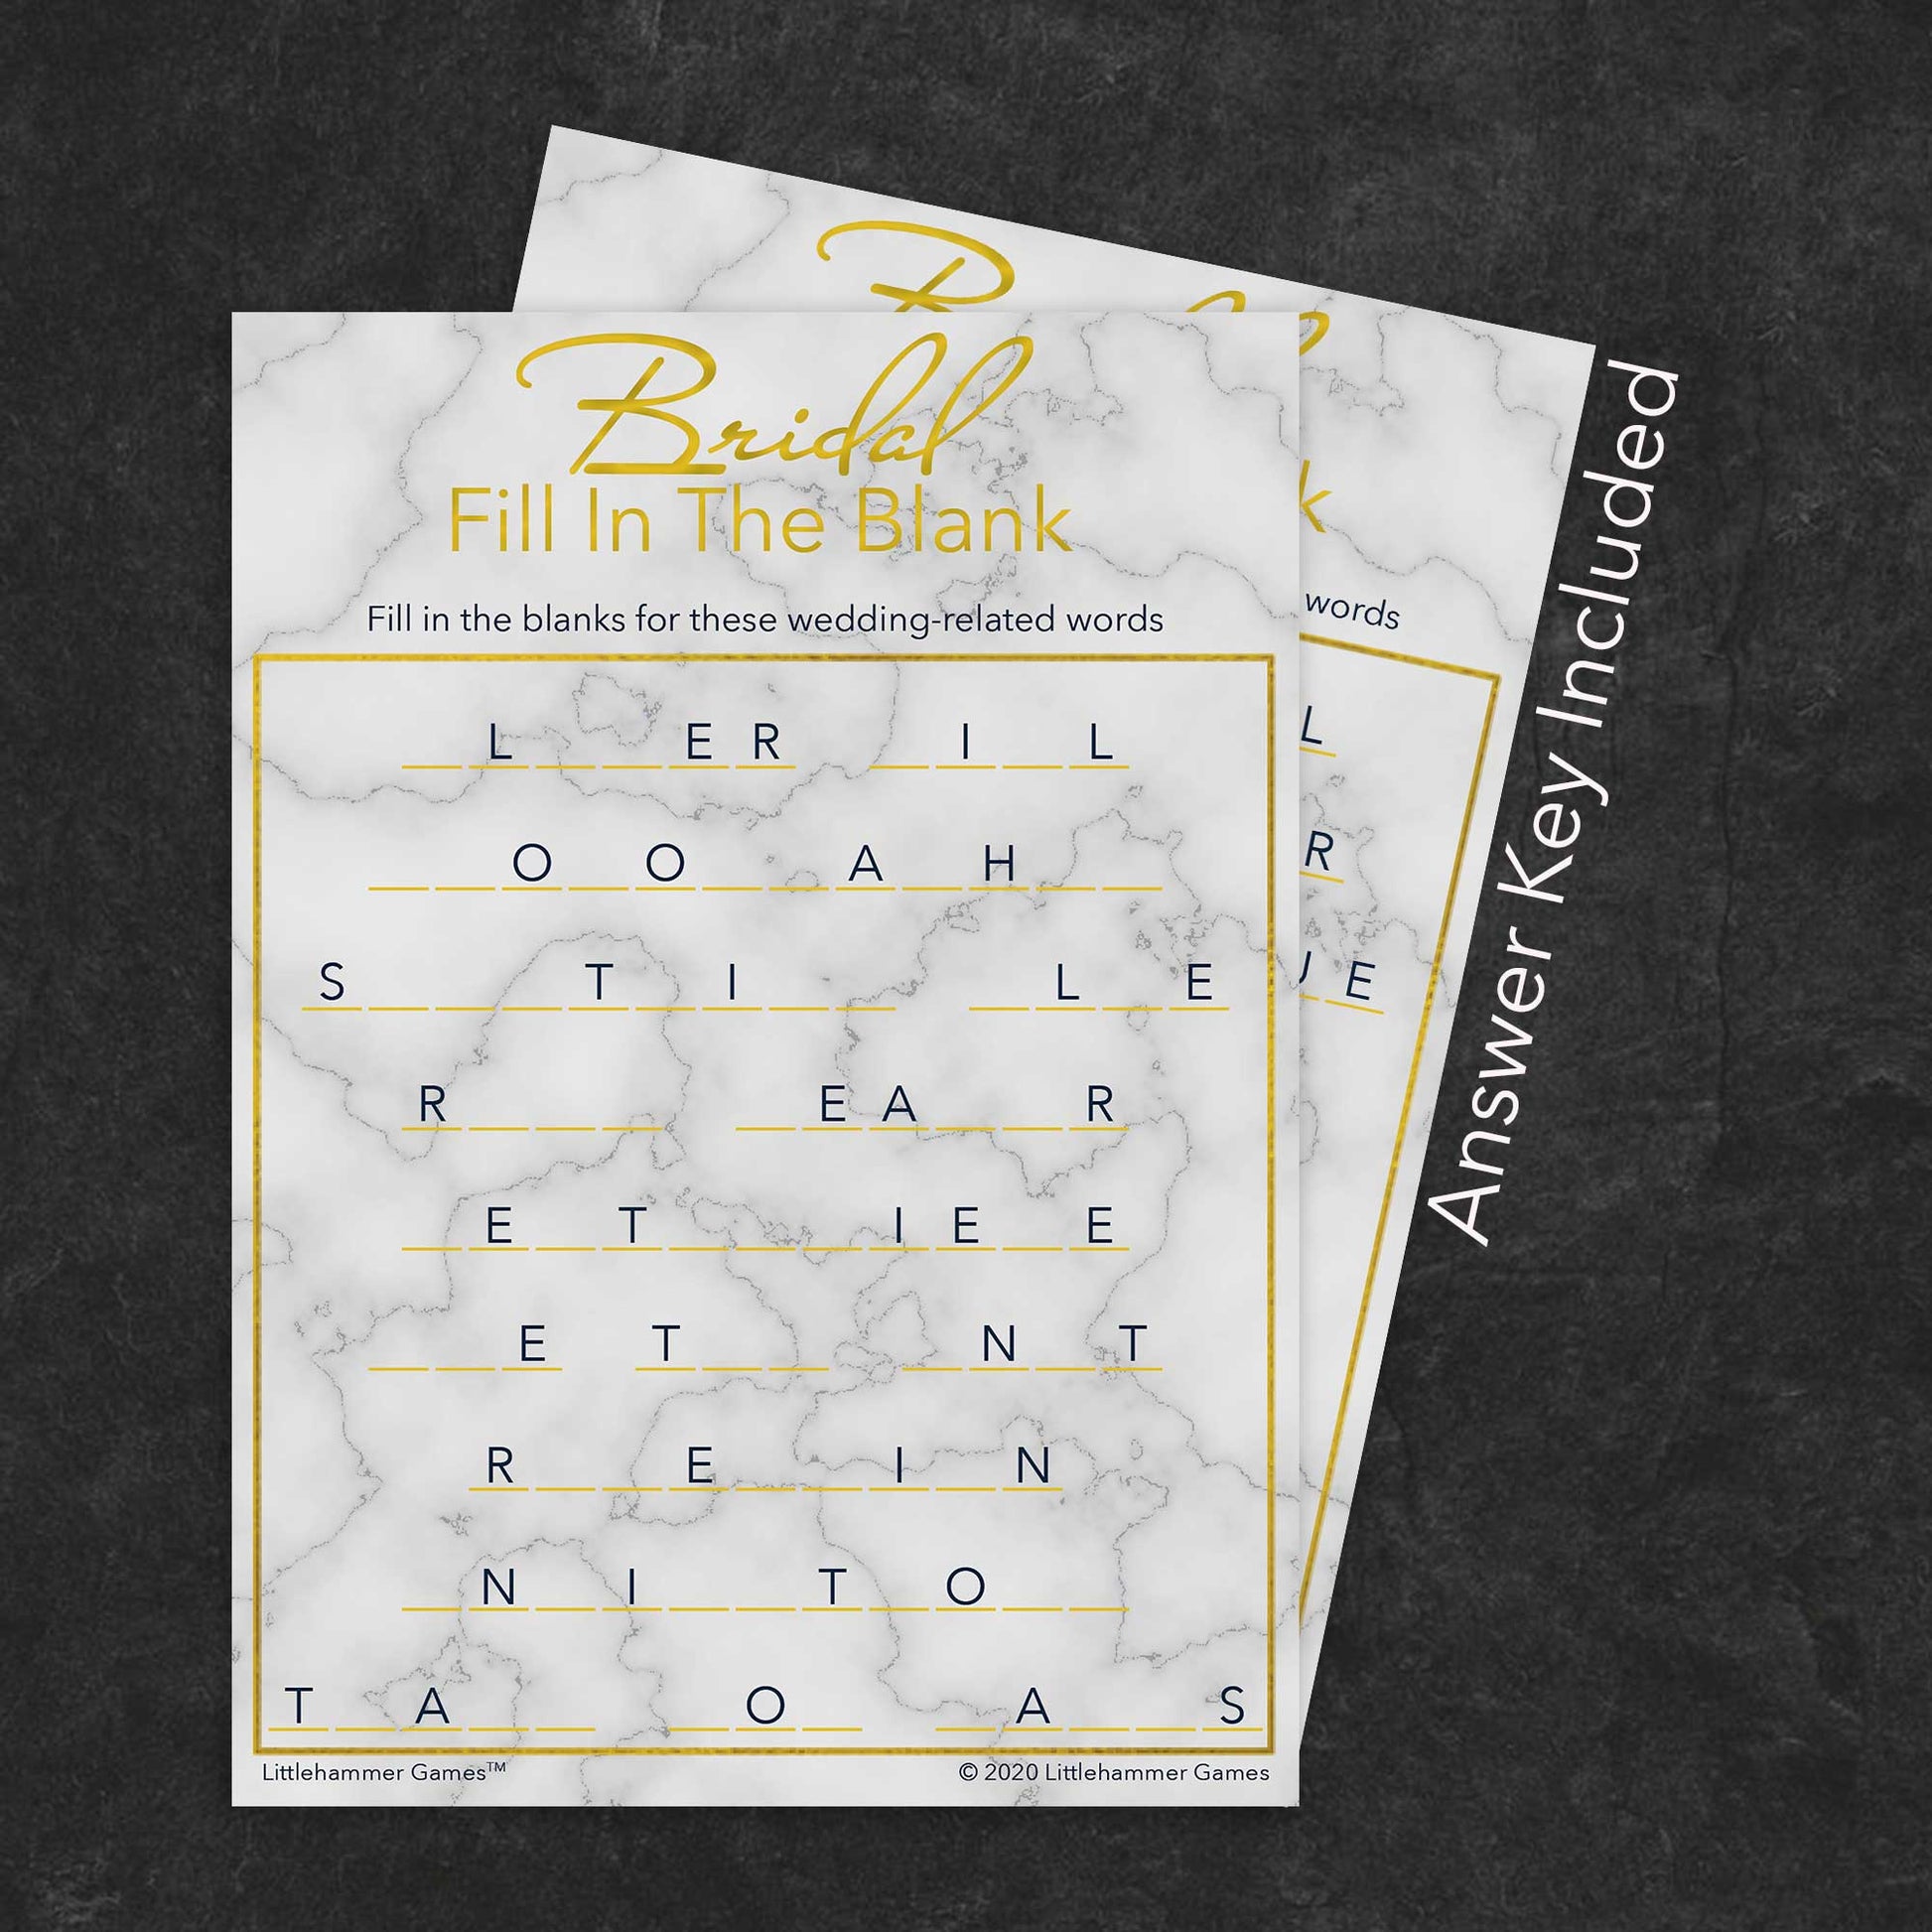 Bridal Fill in the Blank game card with a gold and marble background with answer card tucked behind it on a slate background with white text that says "Answer Key Included"